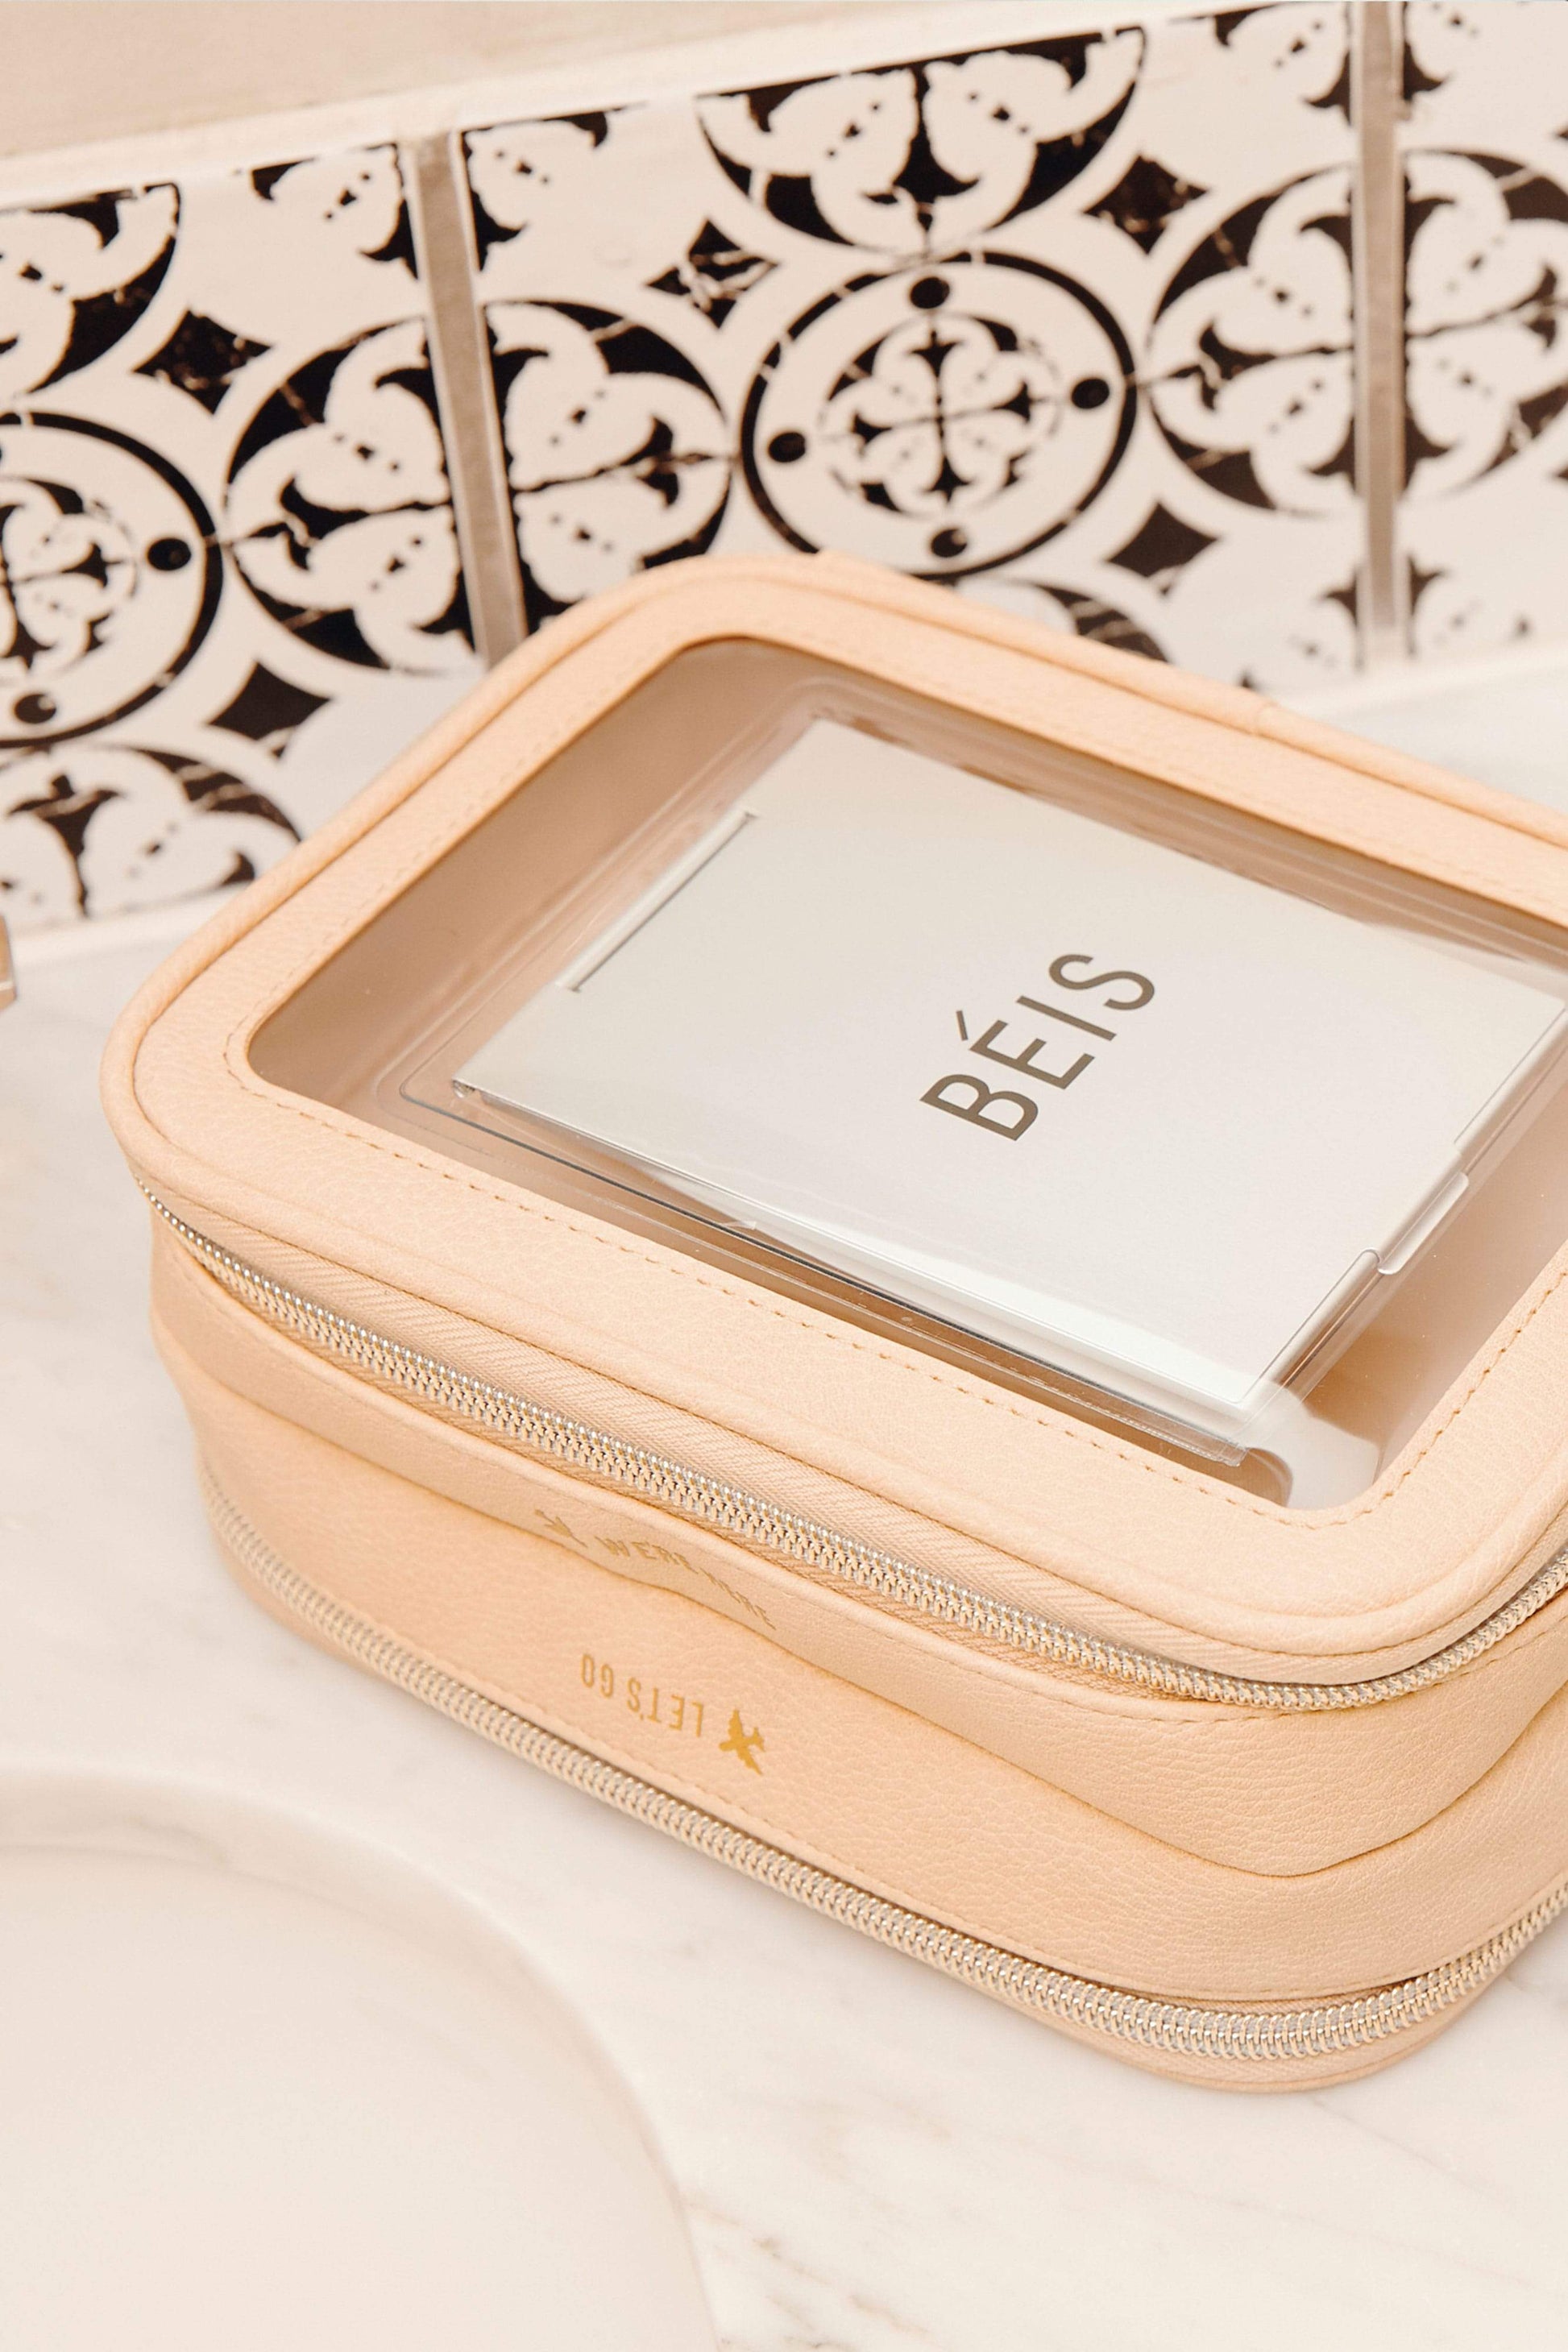 BEIS by Shay Mitchell | The On-The-Go Essential case in Beige on bathroom coutnertop